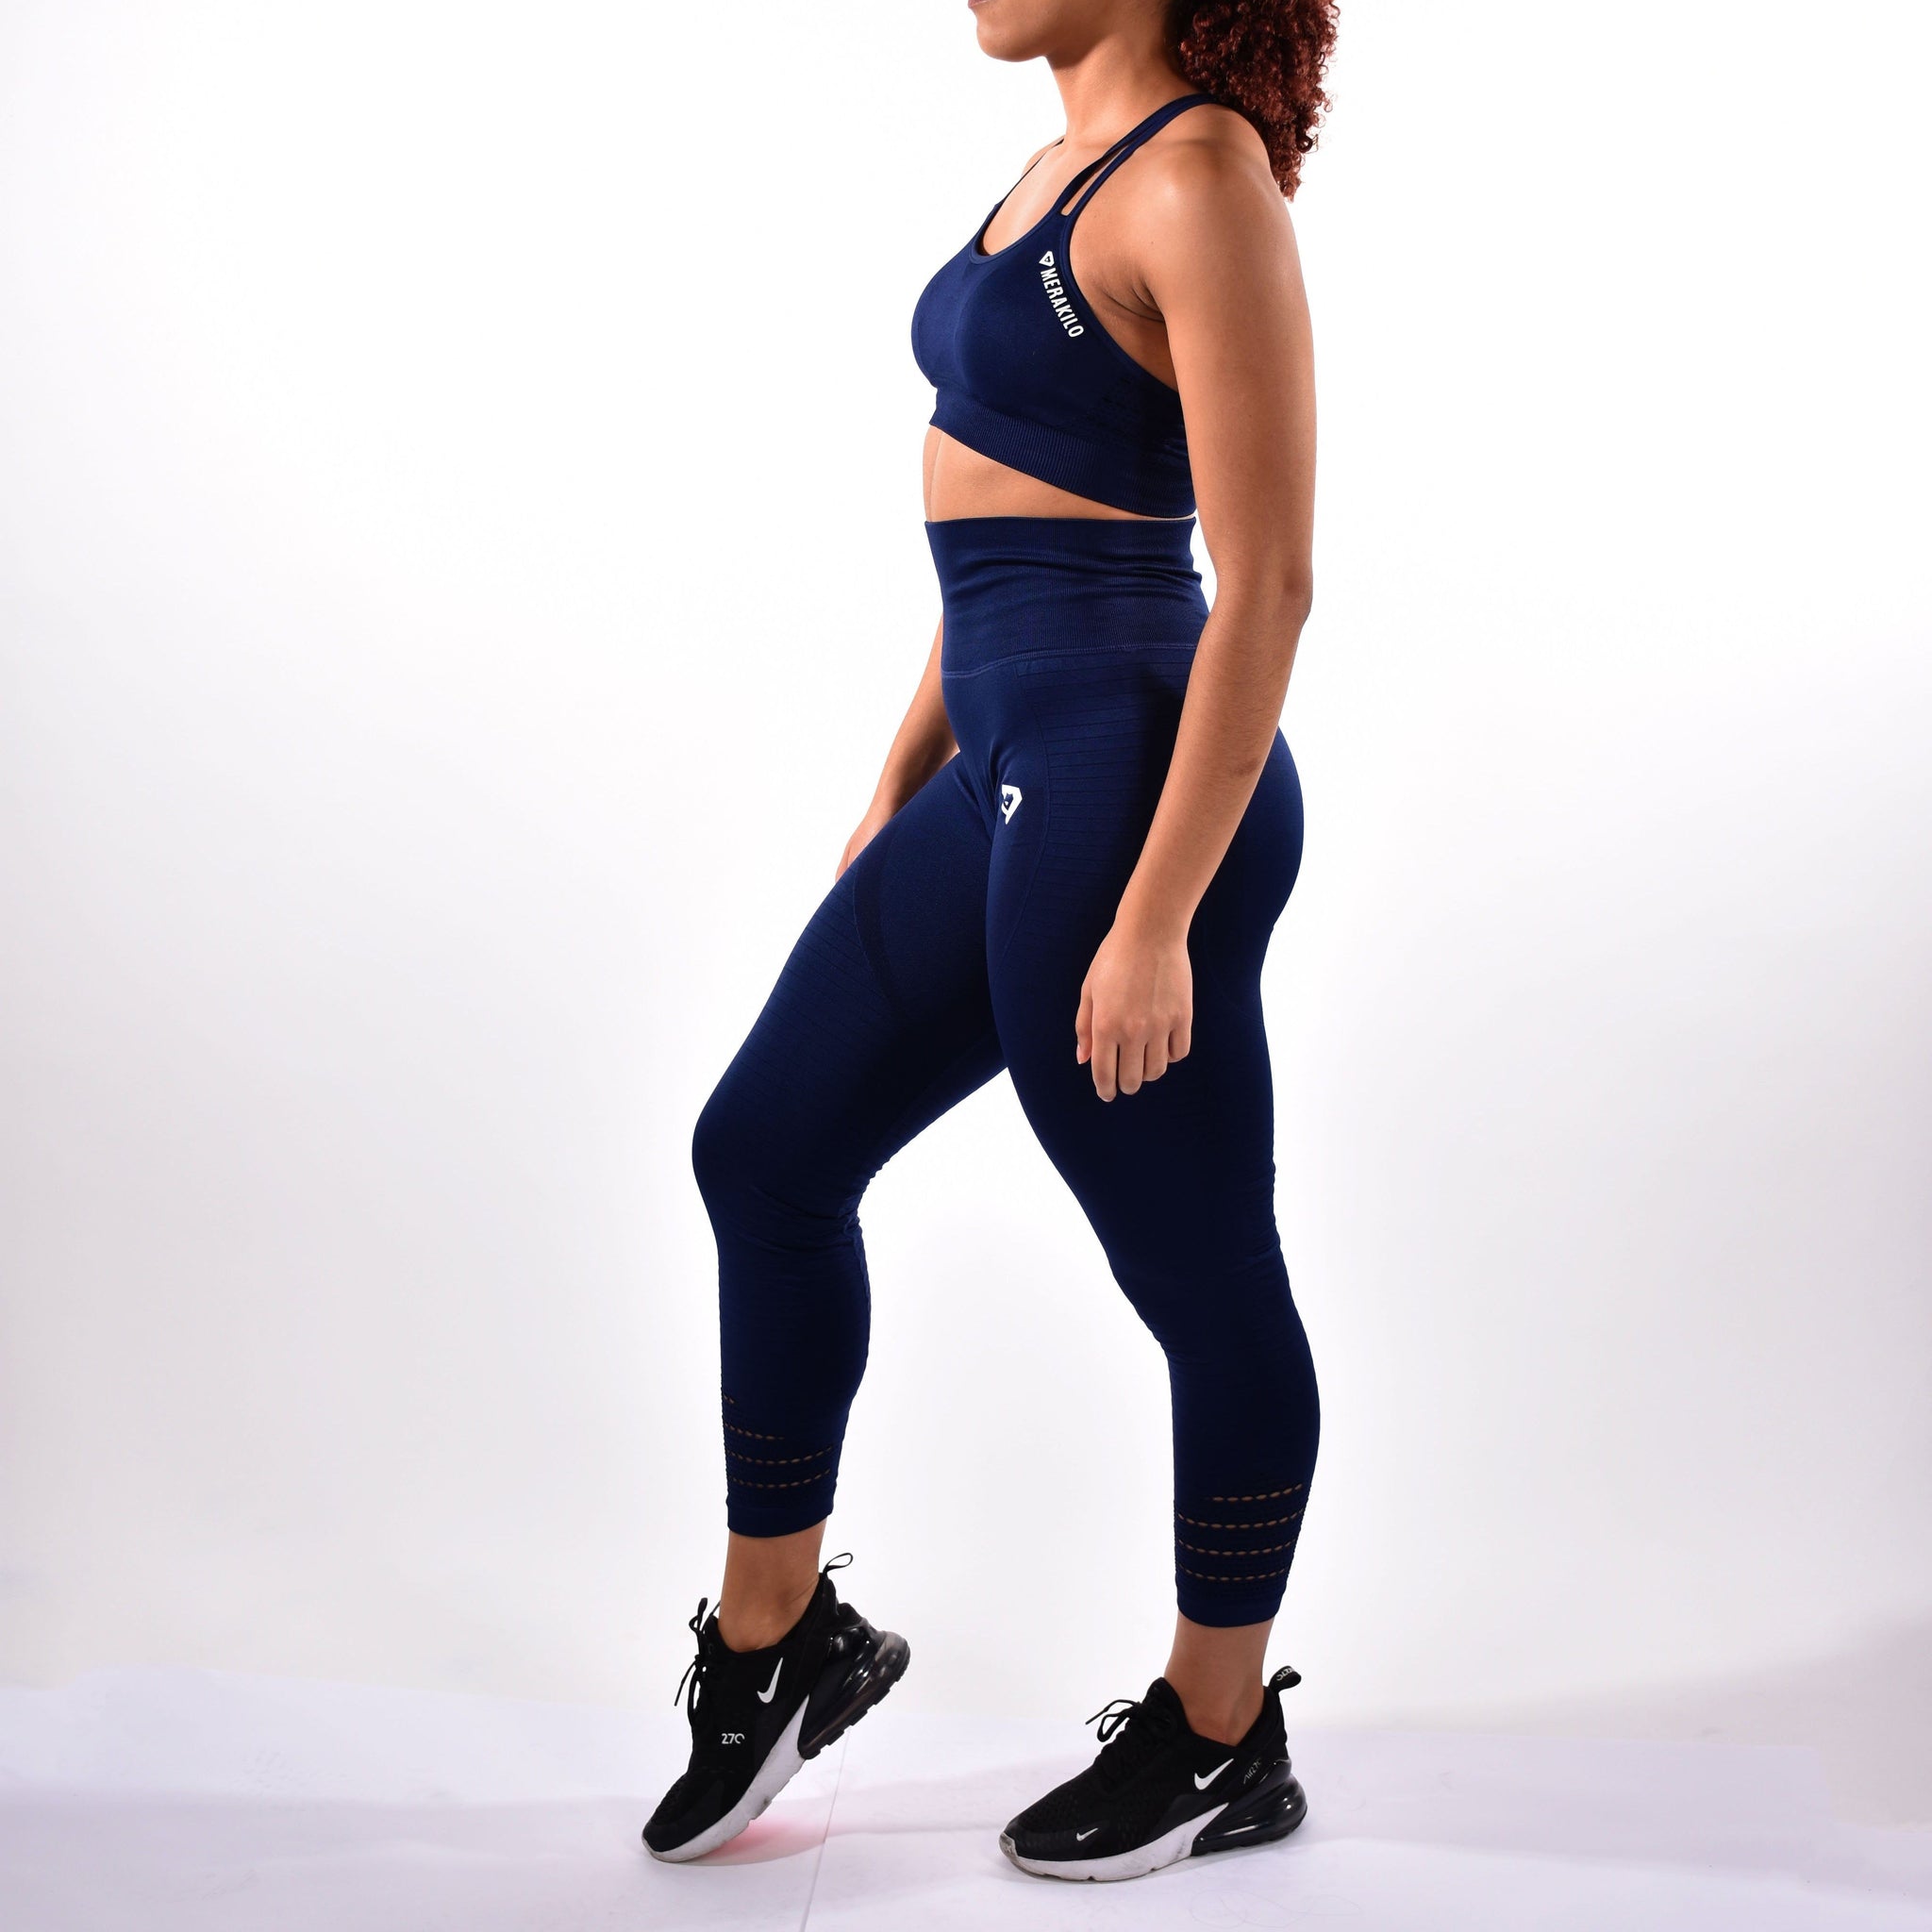 TLC Sport | Body Confident Activewear | Fitness Clothing